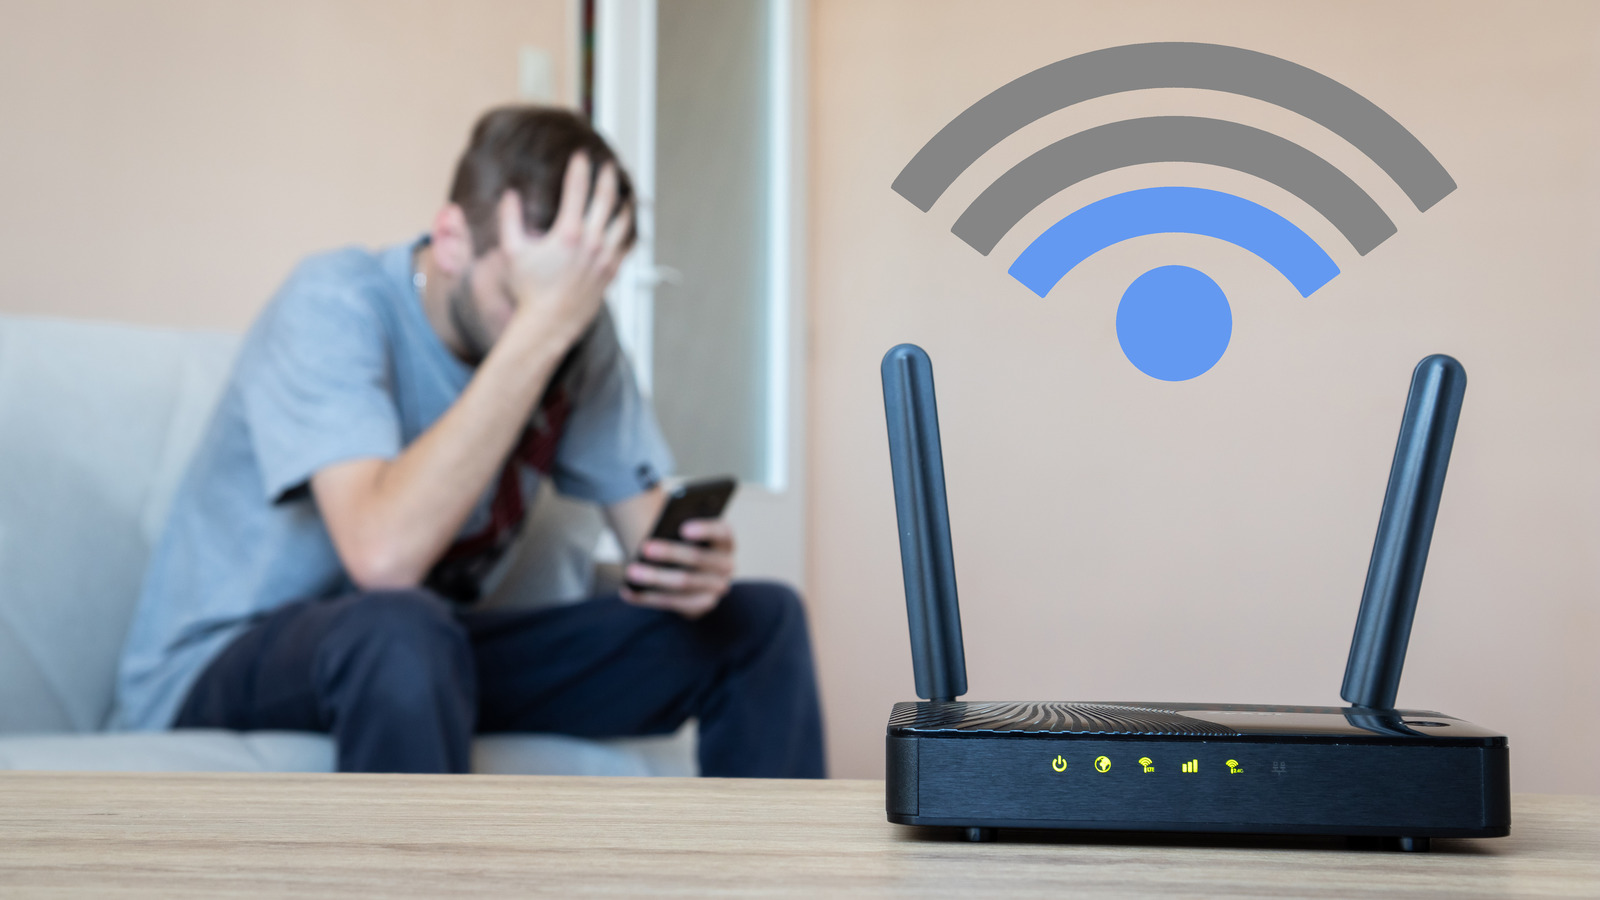 How To Tell If Someone Is Using Your Wi-Fi